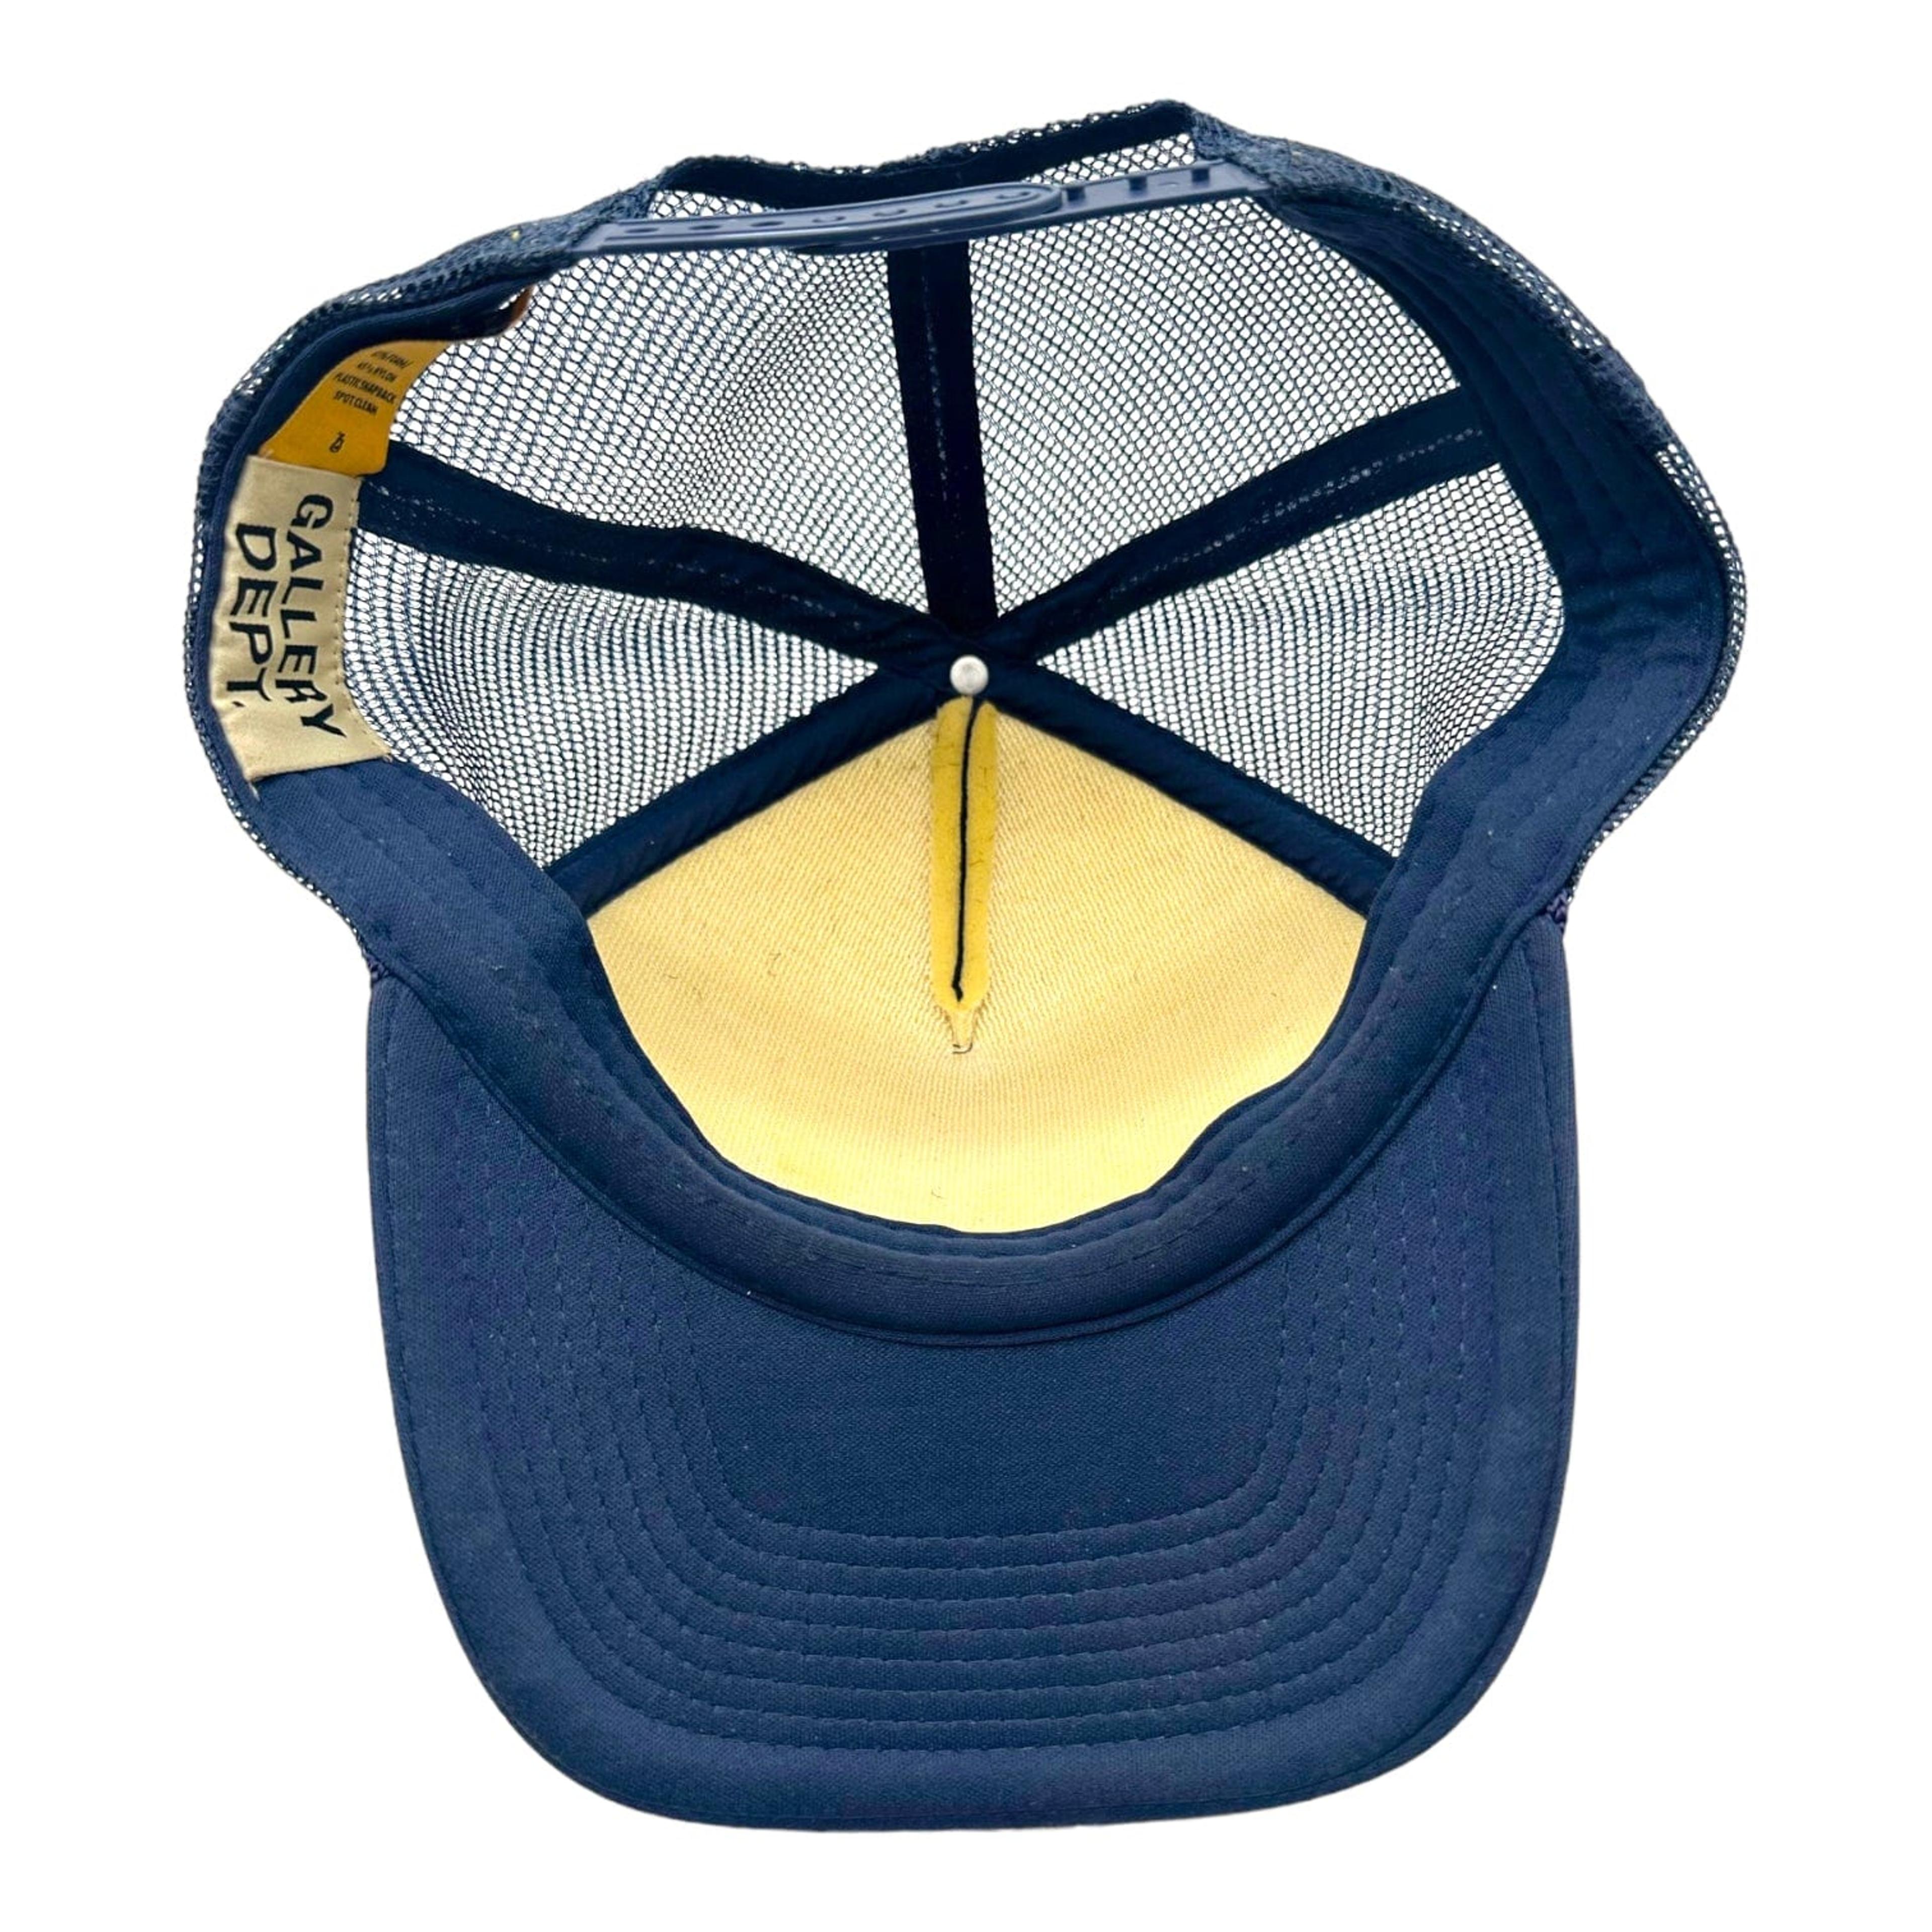 Alternate View 2 of Gallery Department Logo Trucker Hat Navy/Yellow Pre-Owned